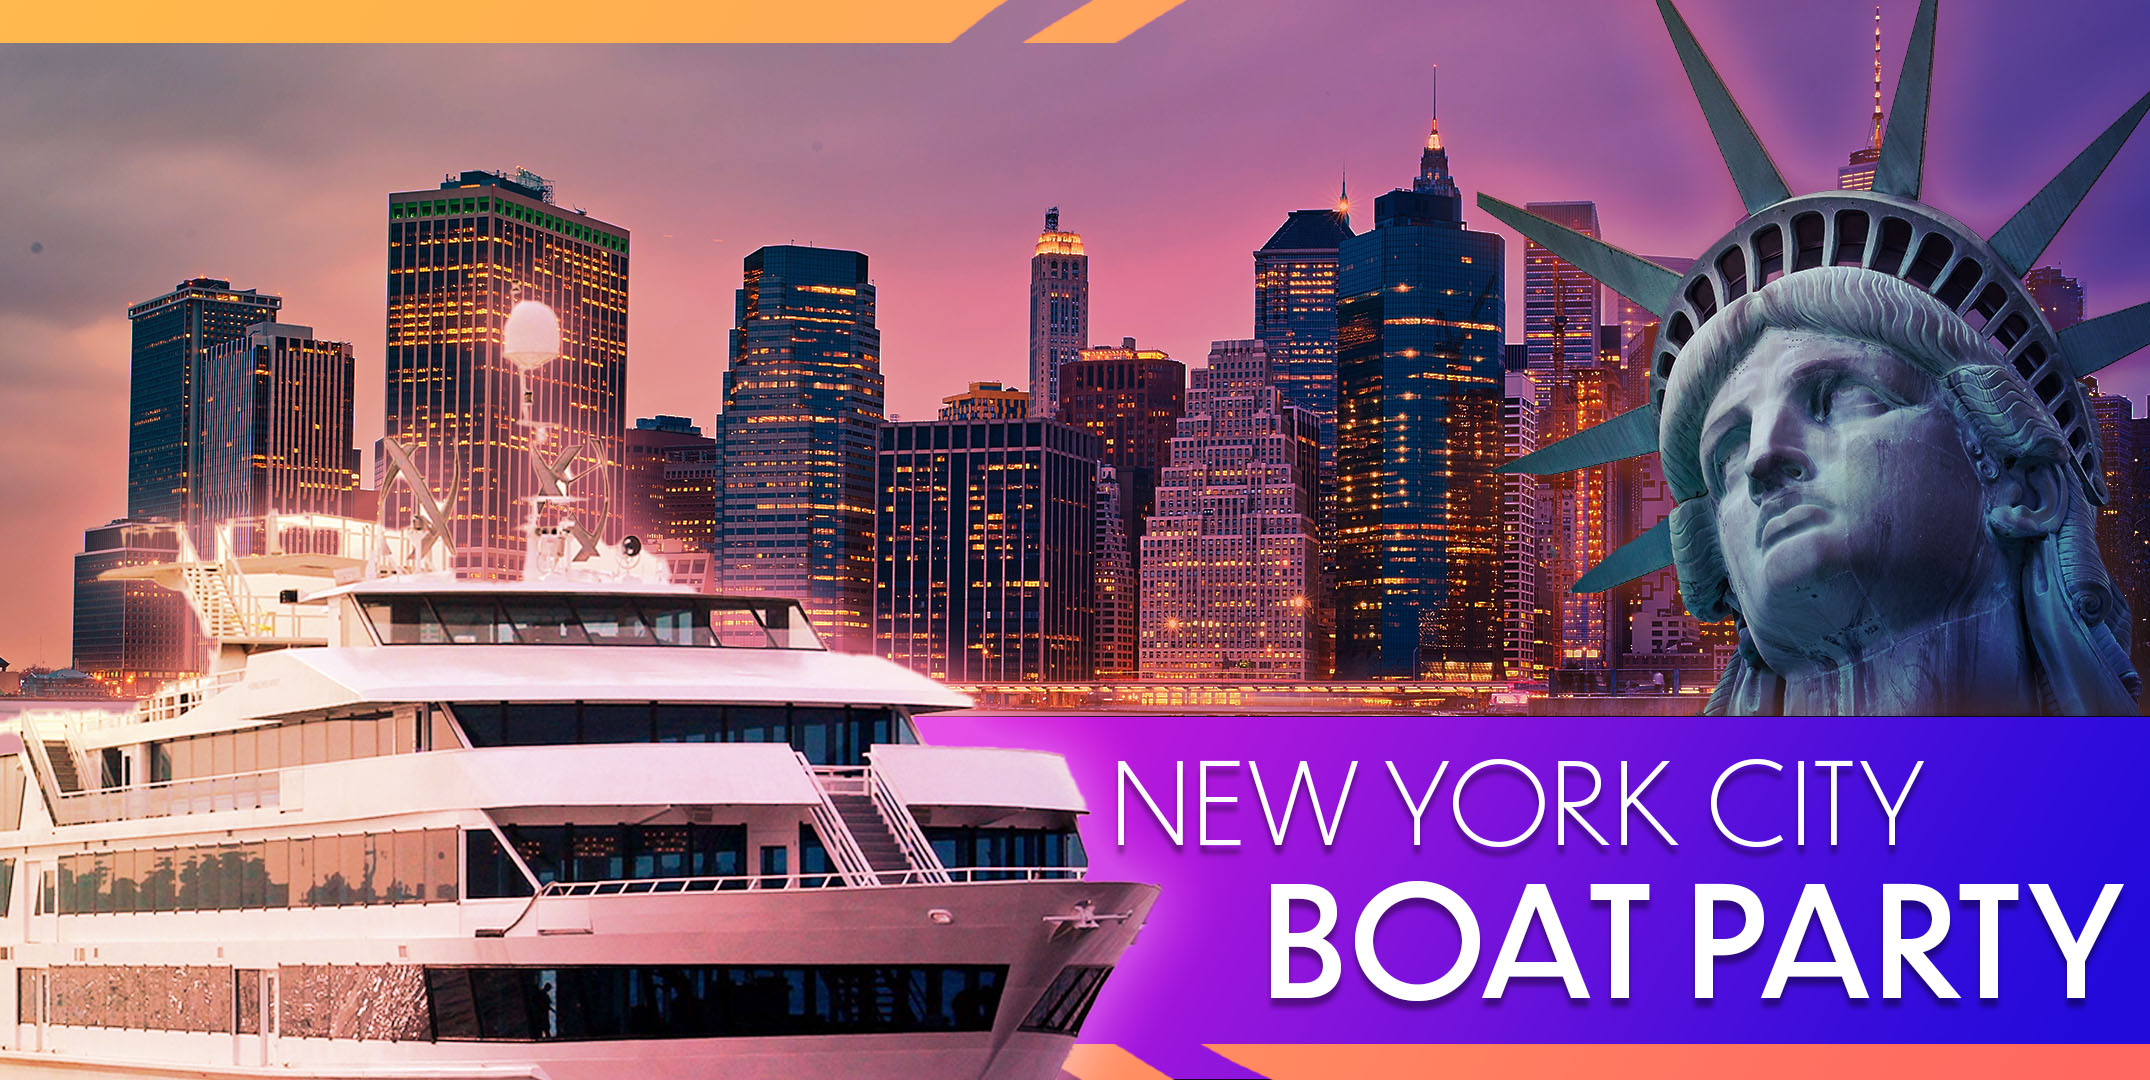 Buy Tickets to THE 1 NEW YORK CITY Boat Party Cruise MEGA YACHT